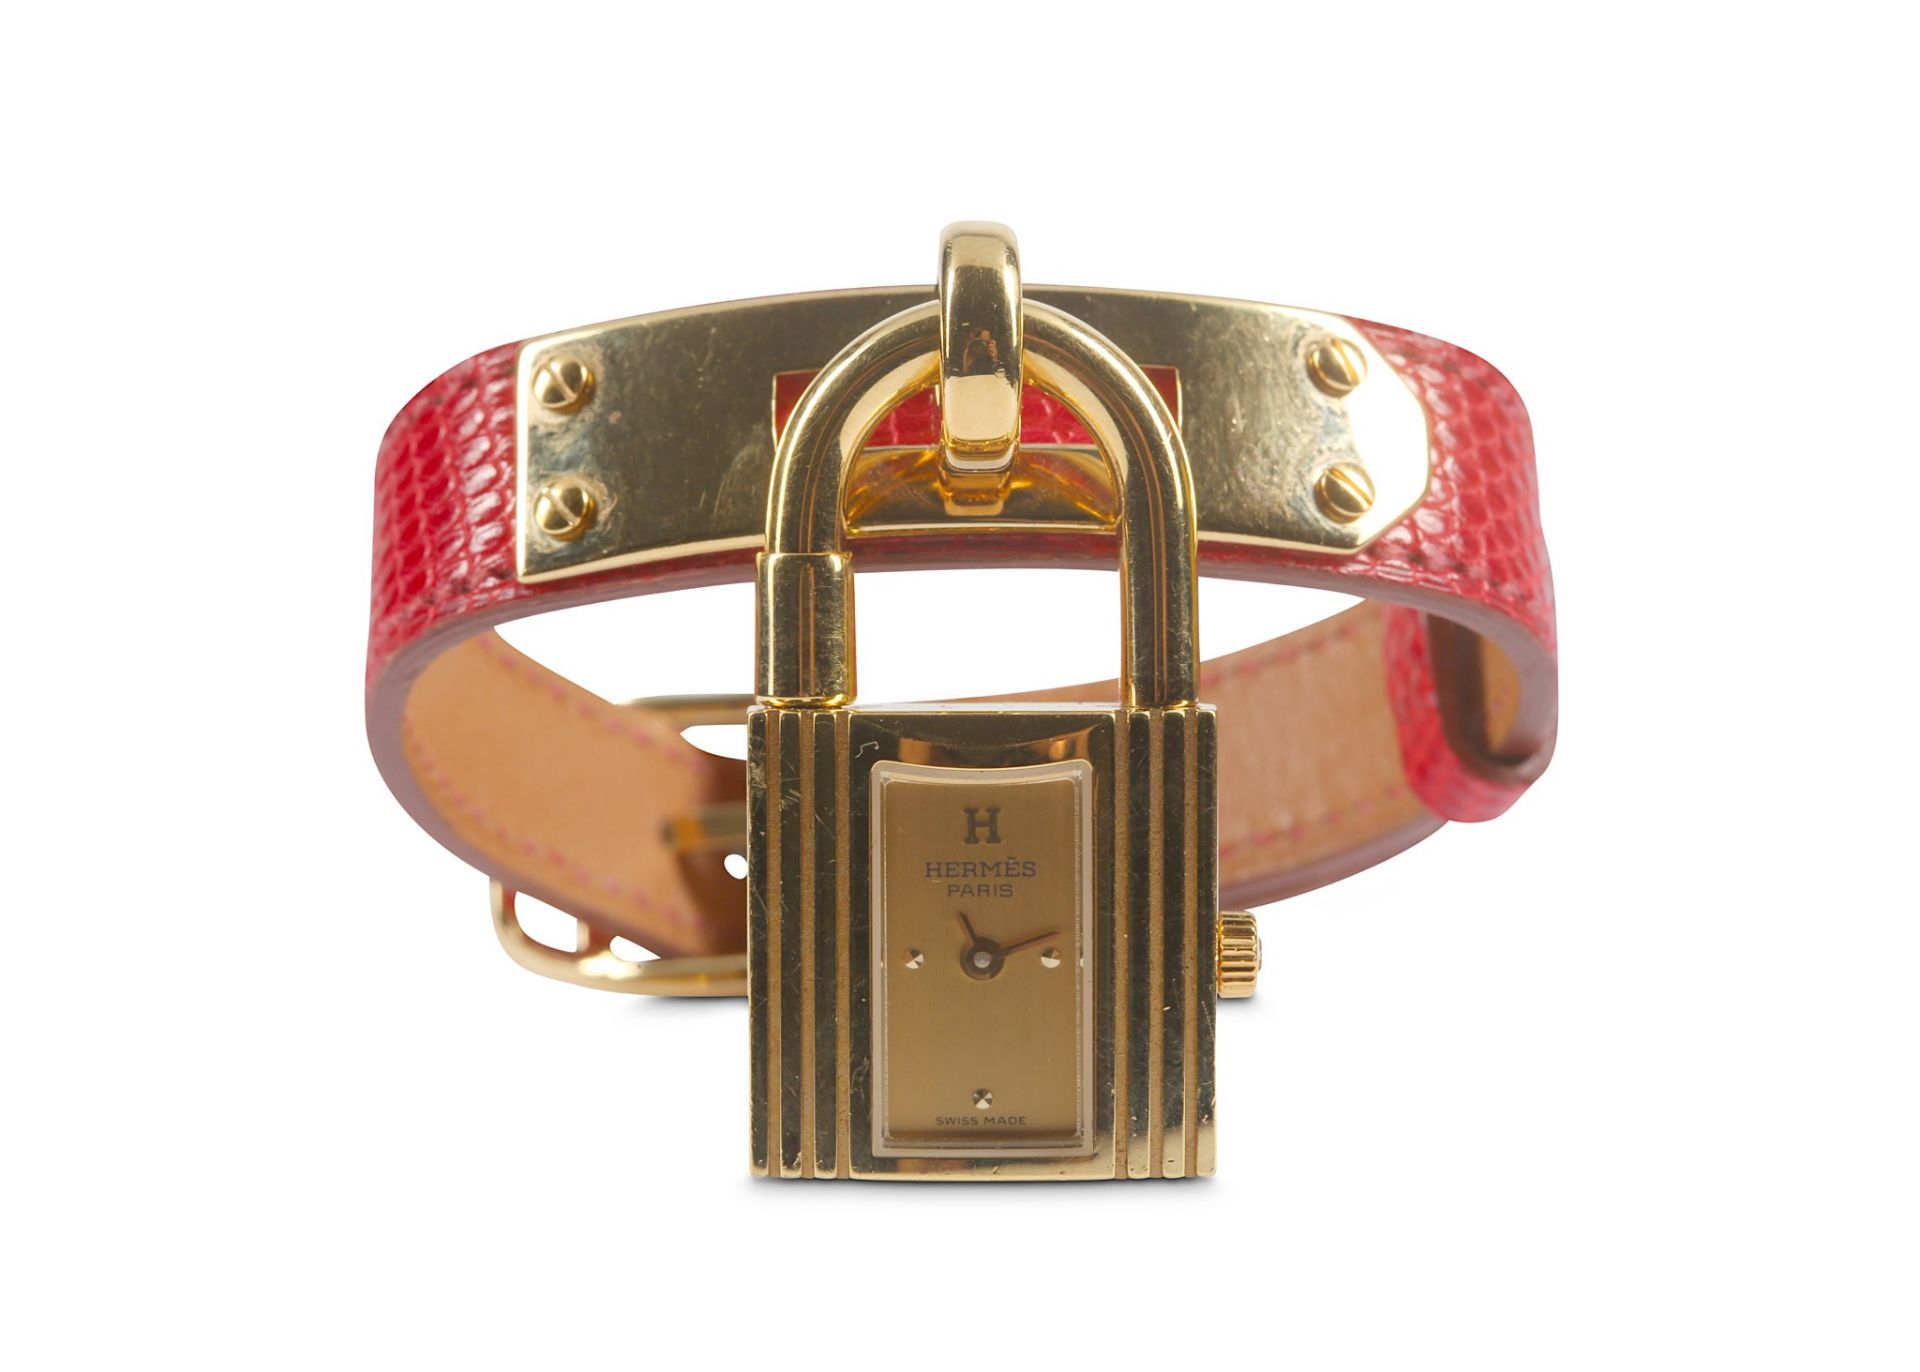 Hermes Red Lizard Kelly Watch, 1990s (date code faint), red lizard skin strap with gold plated